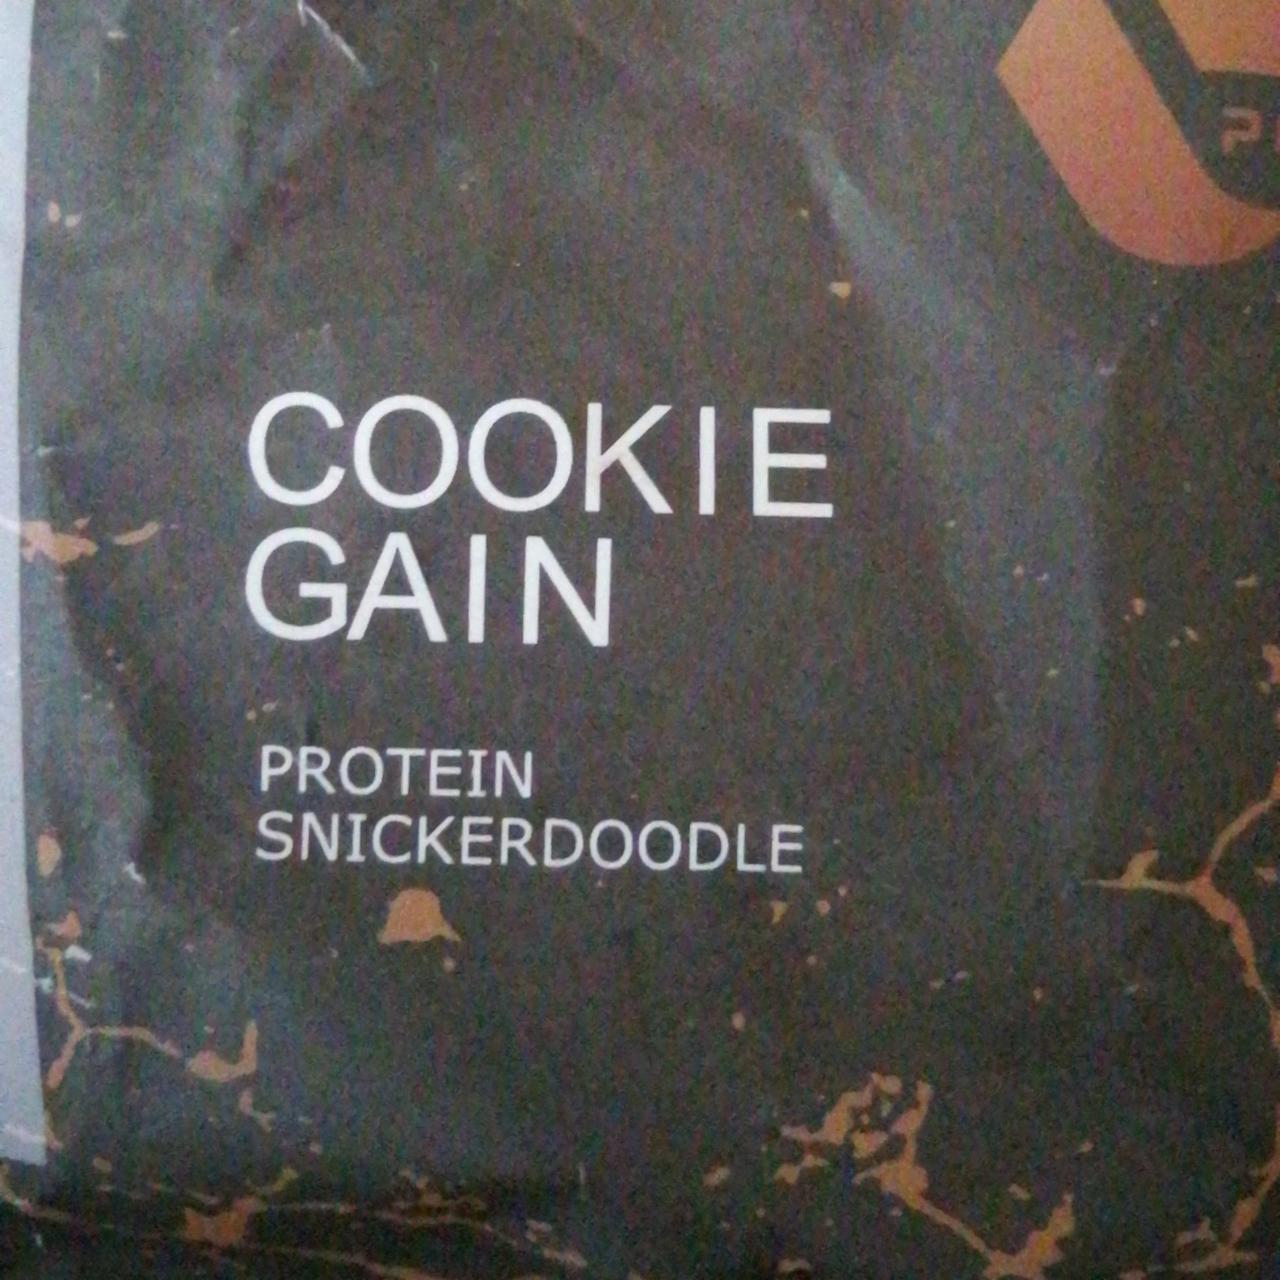 Fotografie - Cookie gain protein snickerdoodle Passion bar